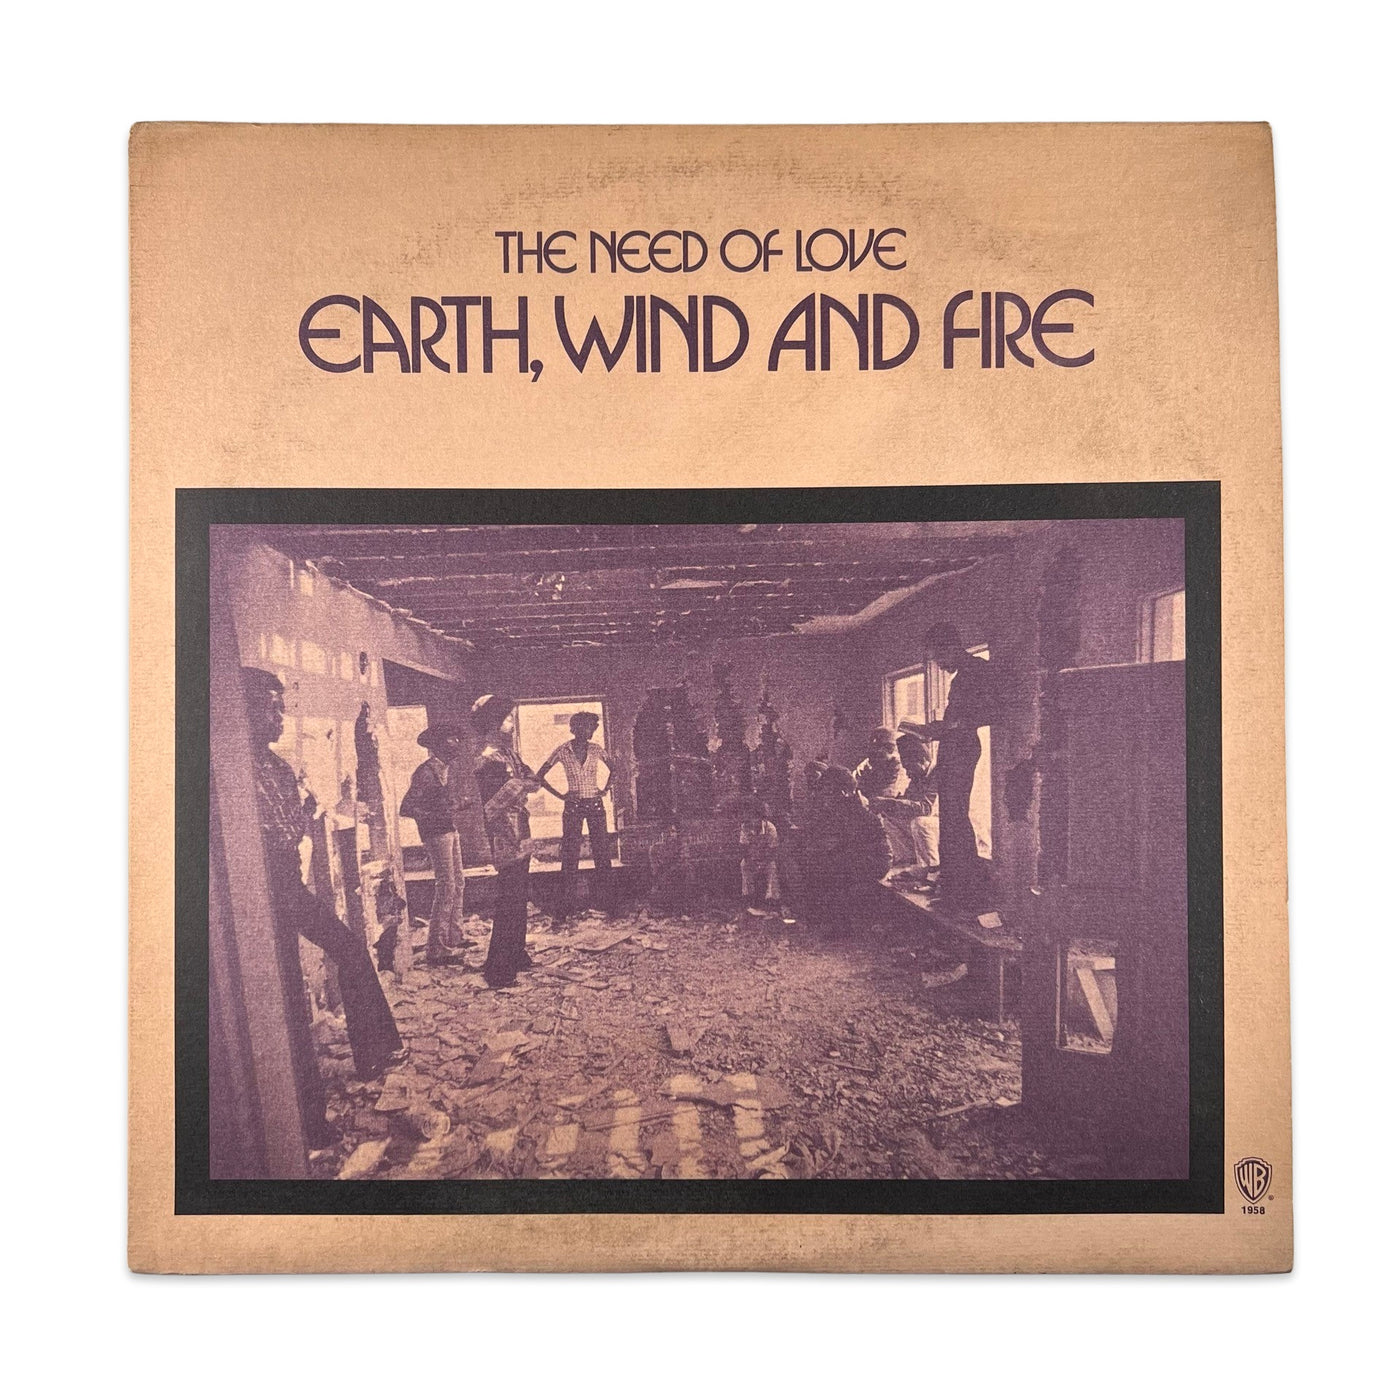 Earth, Wind And Fire – The Need Of Love